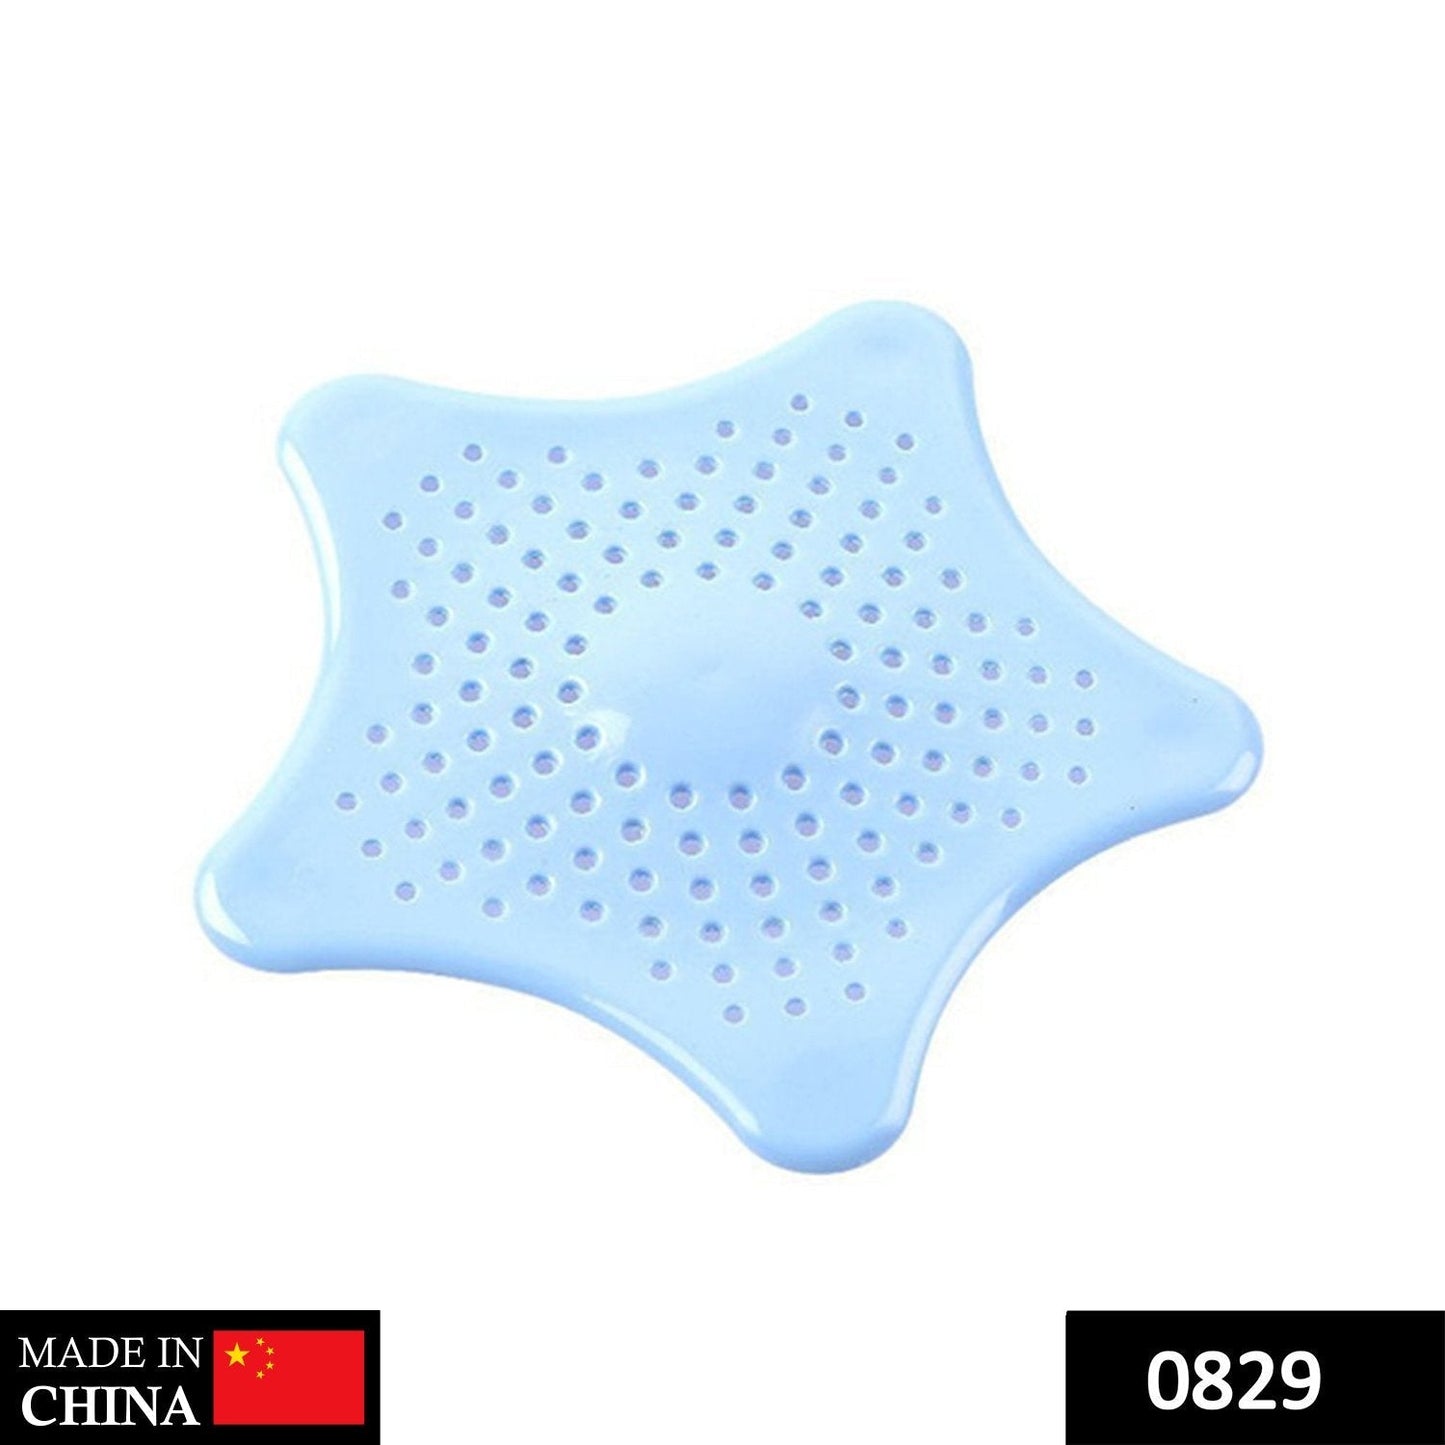 0829 Silicone Star Shaped Sink Filter Bathroom Hair Catcher Drain Strainers for Basin 